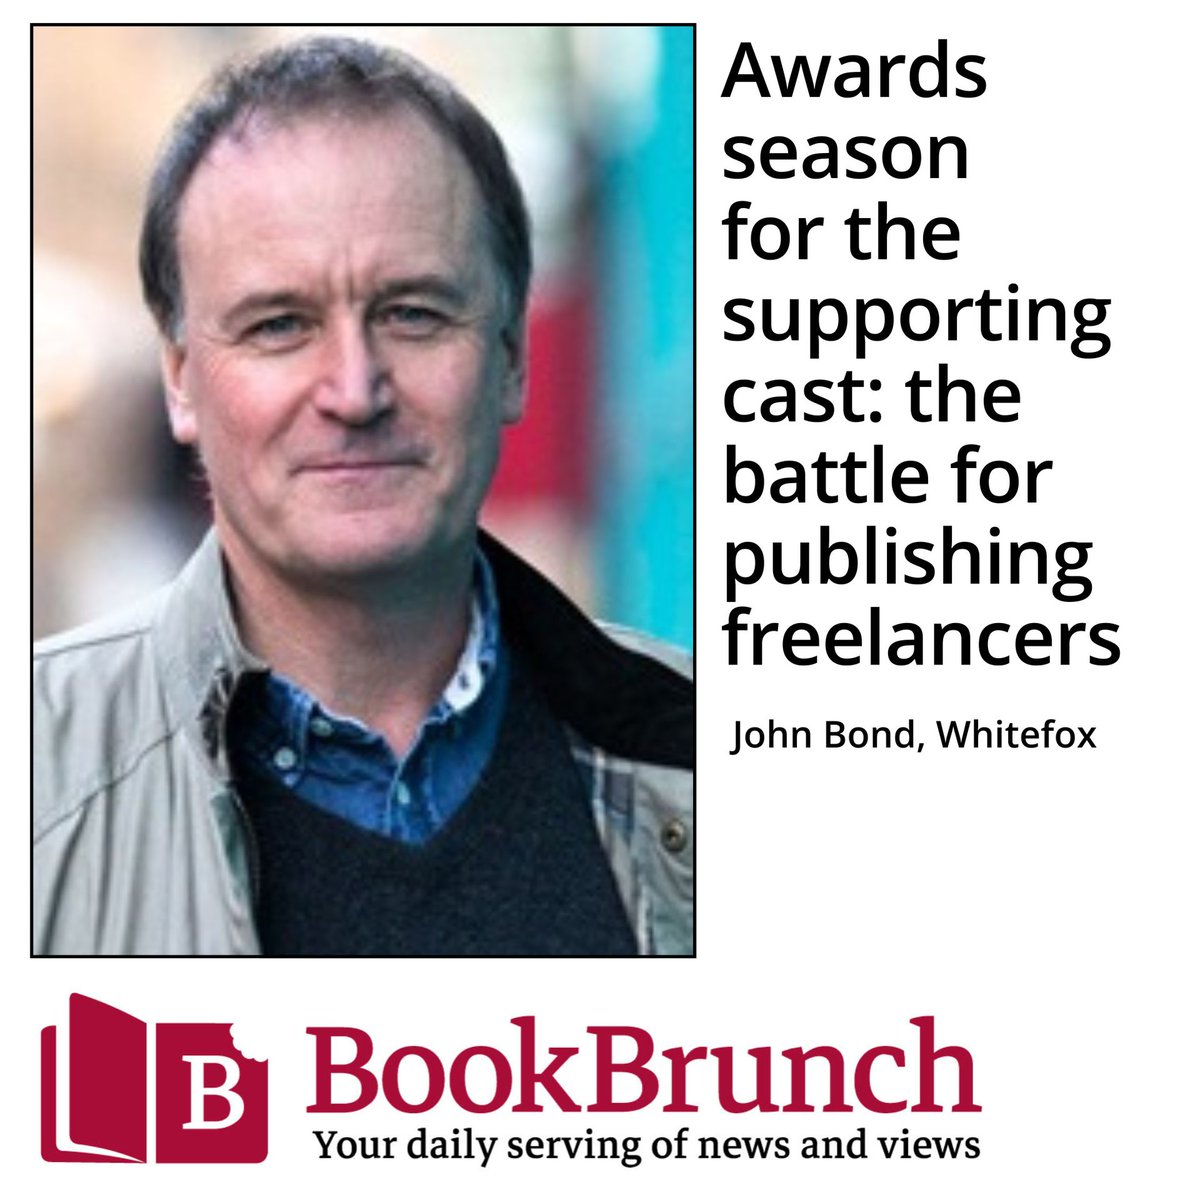 Freelancers are the unsung influencers of publishing, writes John Bond. Do you agree? Read the post on the BookBrunch website 👉👉👉 bit.ly/3UMURhC